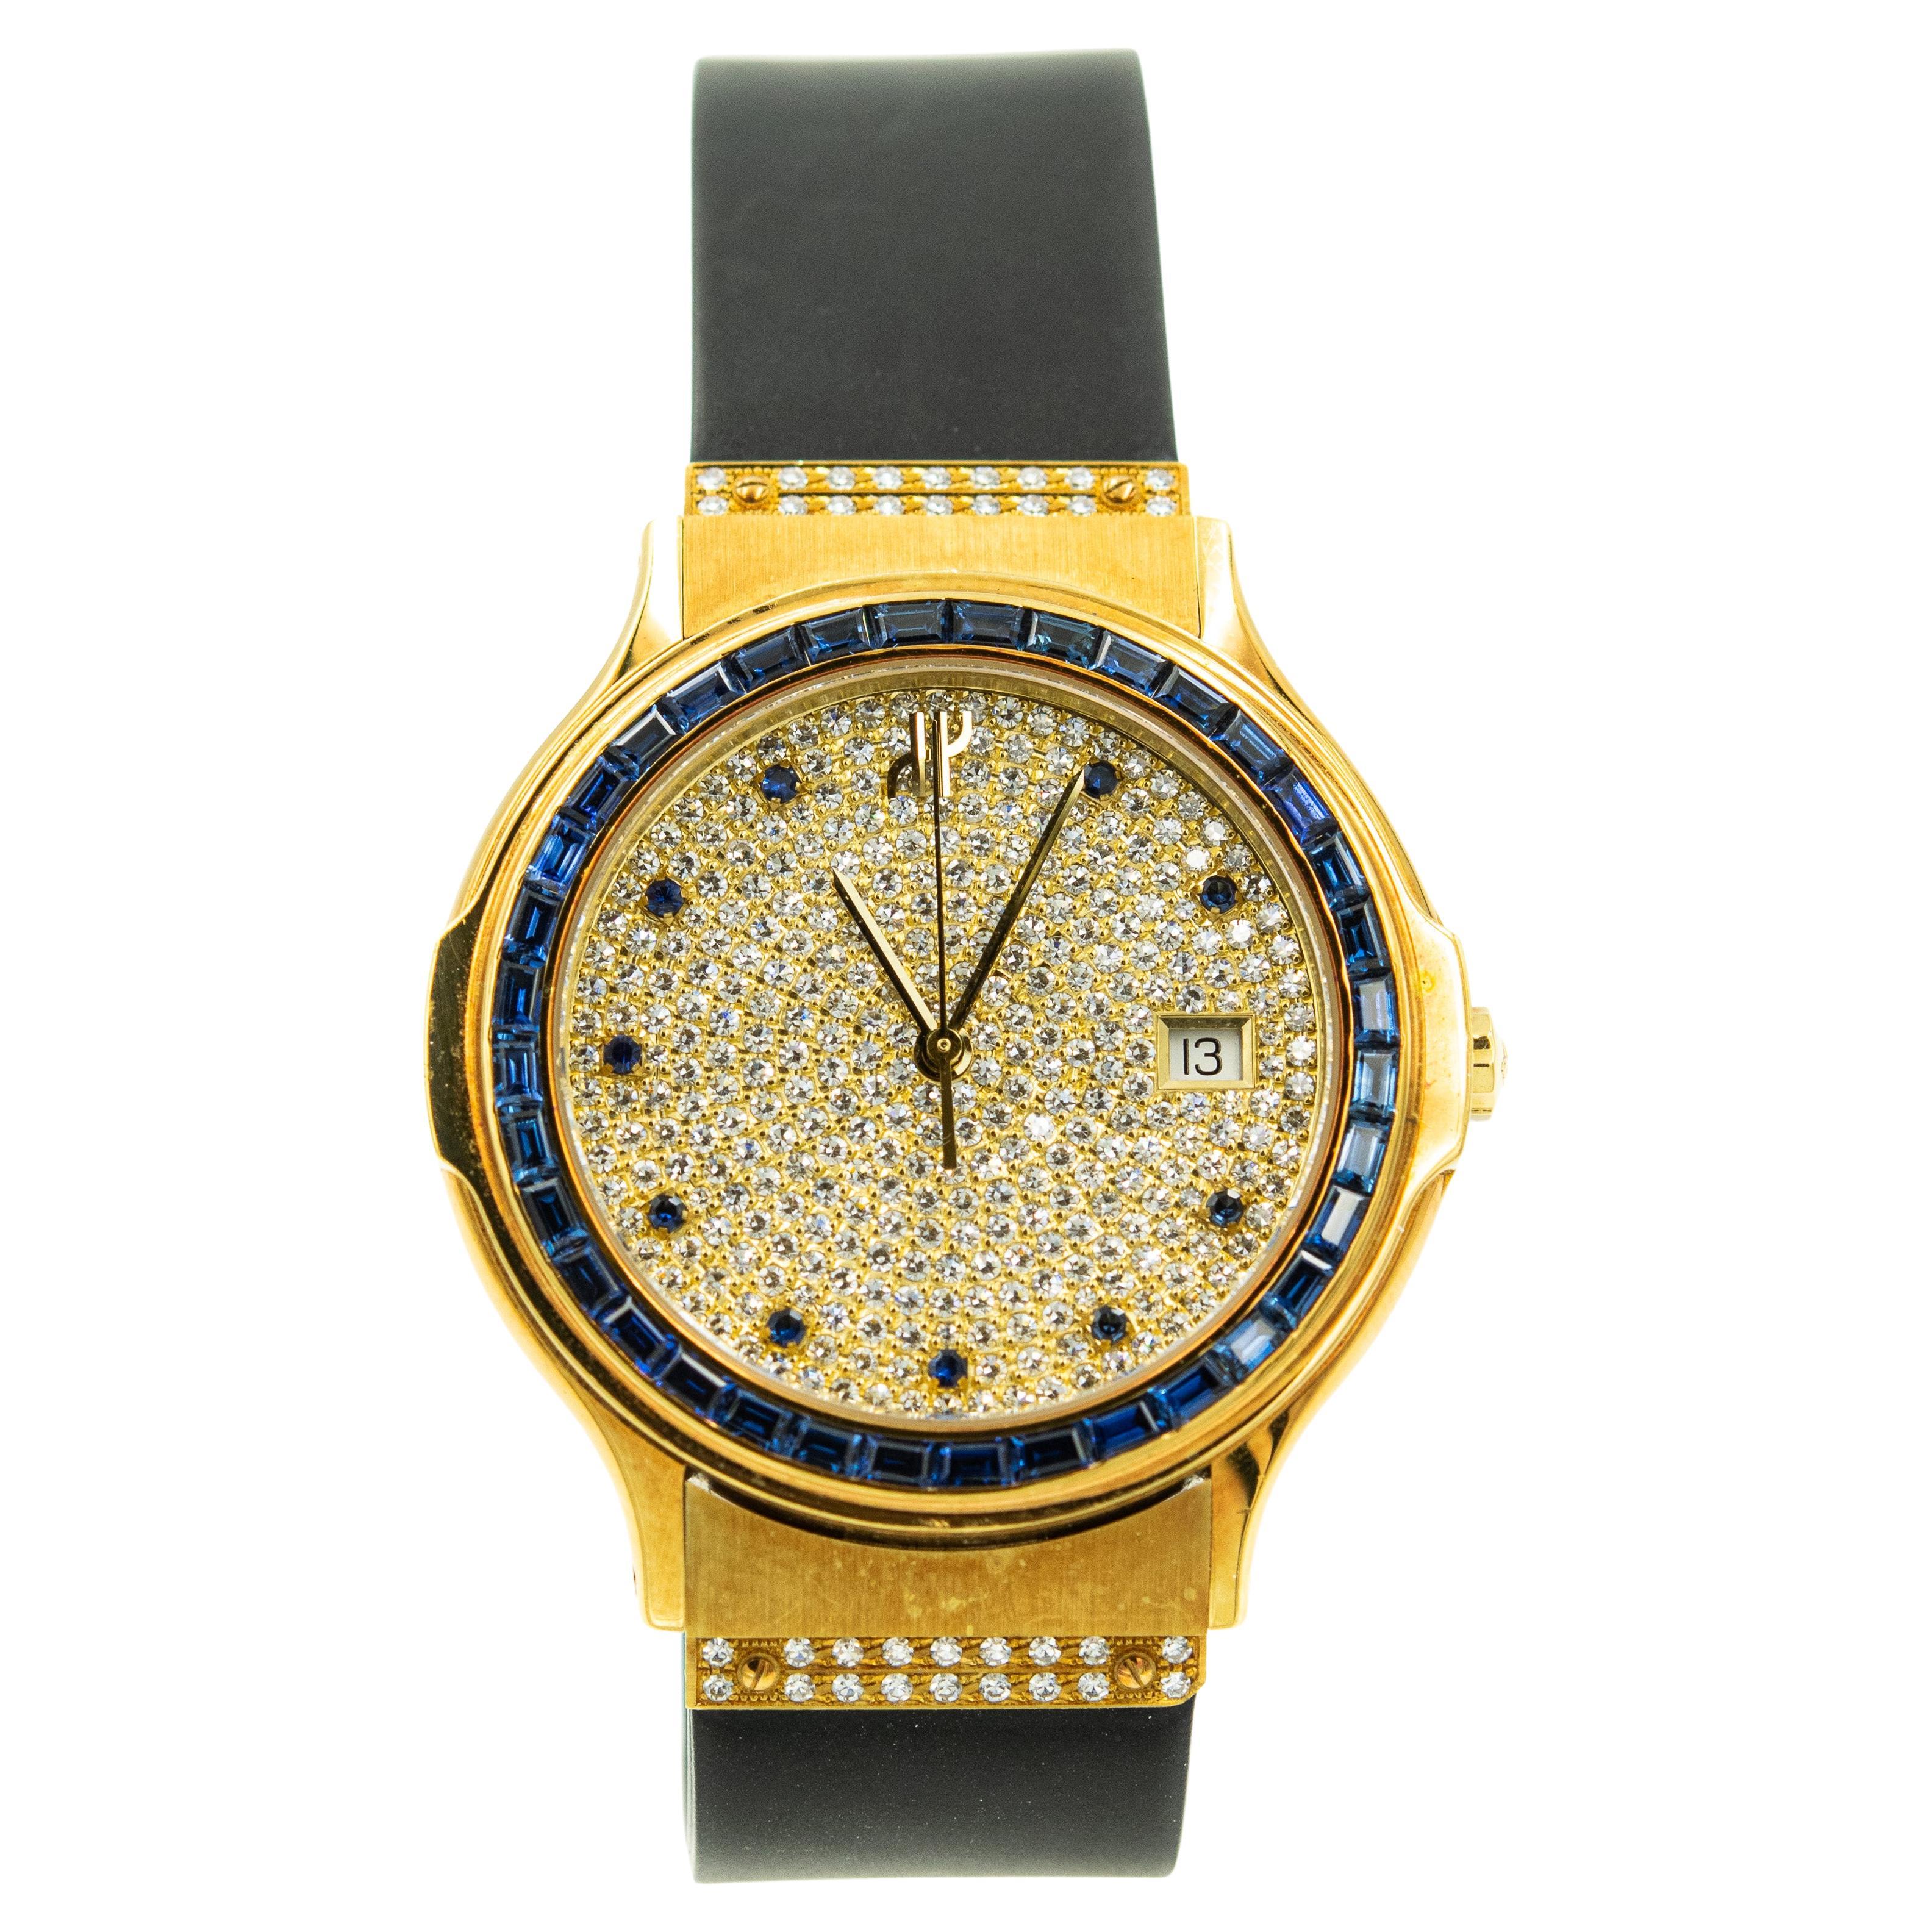 Men's Hublot Wristwatch with Sapphire Bezel and Indexes Ref. 1522.3.081 Serial 282623 features a 37 mm x 44mm 18k yellow gold case, with a pave set diamond dial on a black rubber strap and factory-set diamond buckle. It has a distinctive sapphire